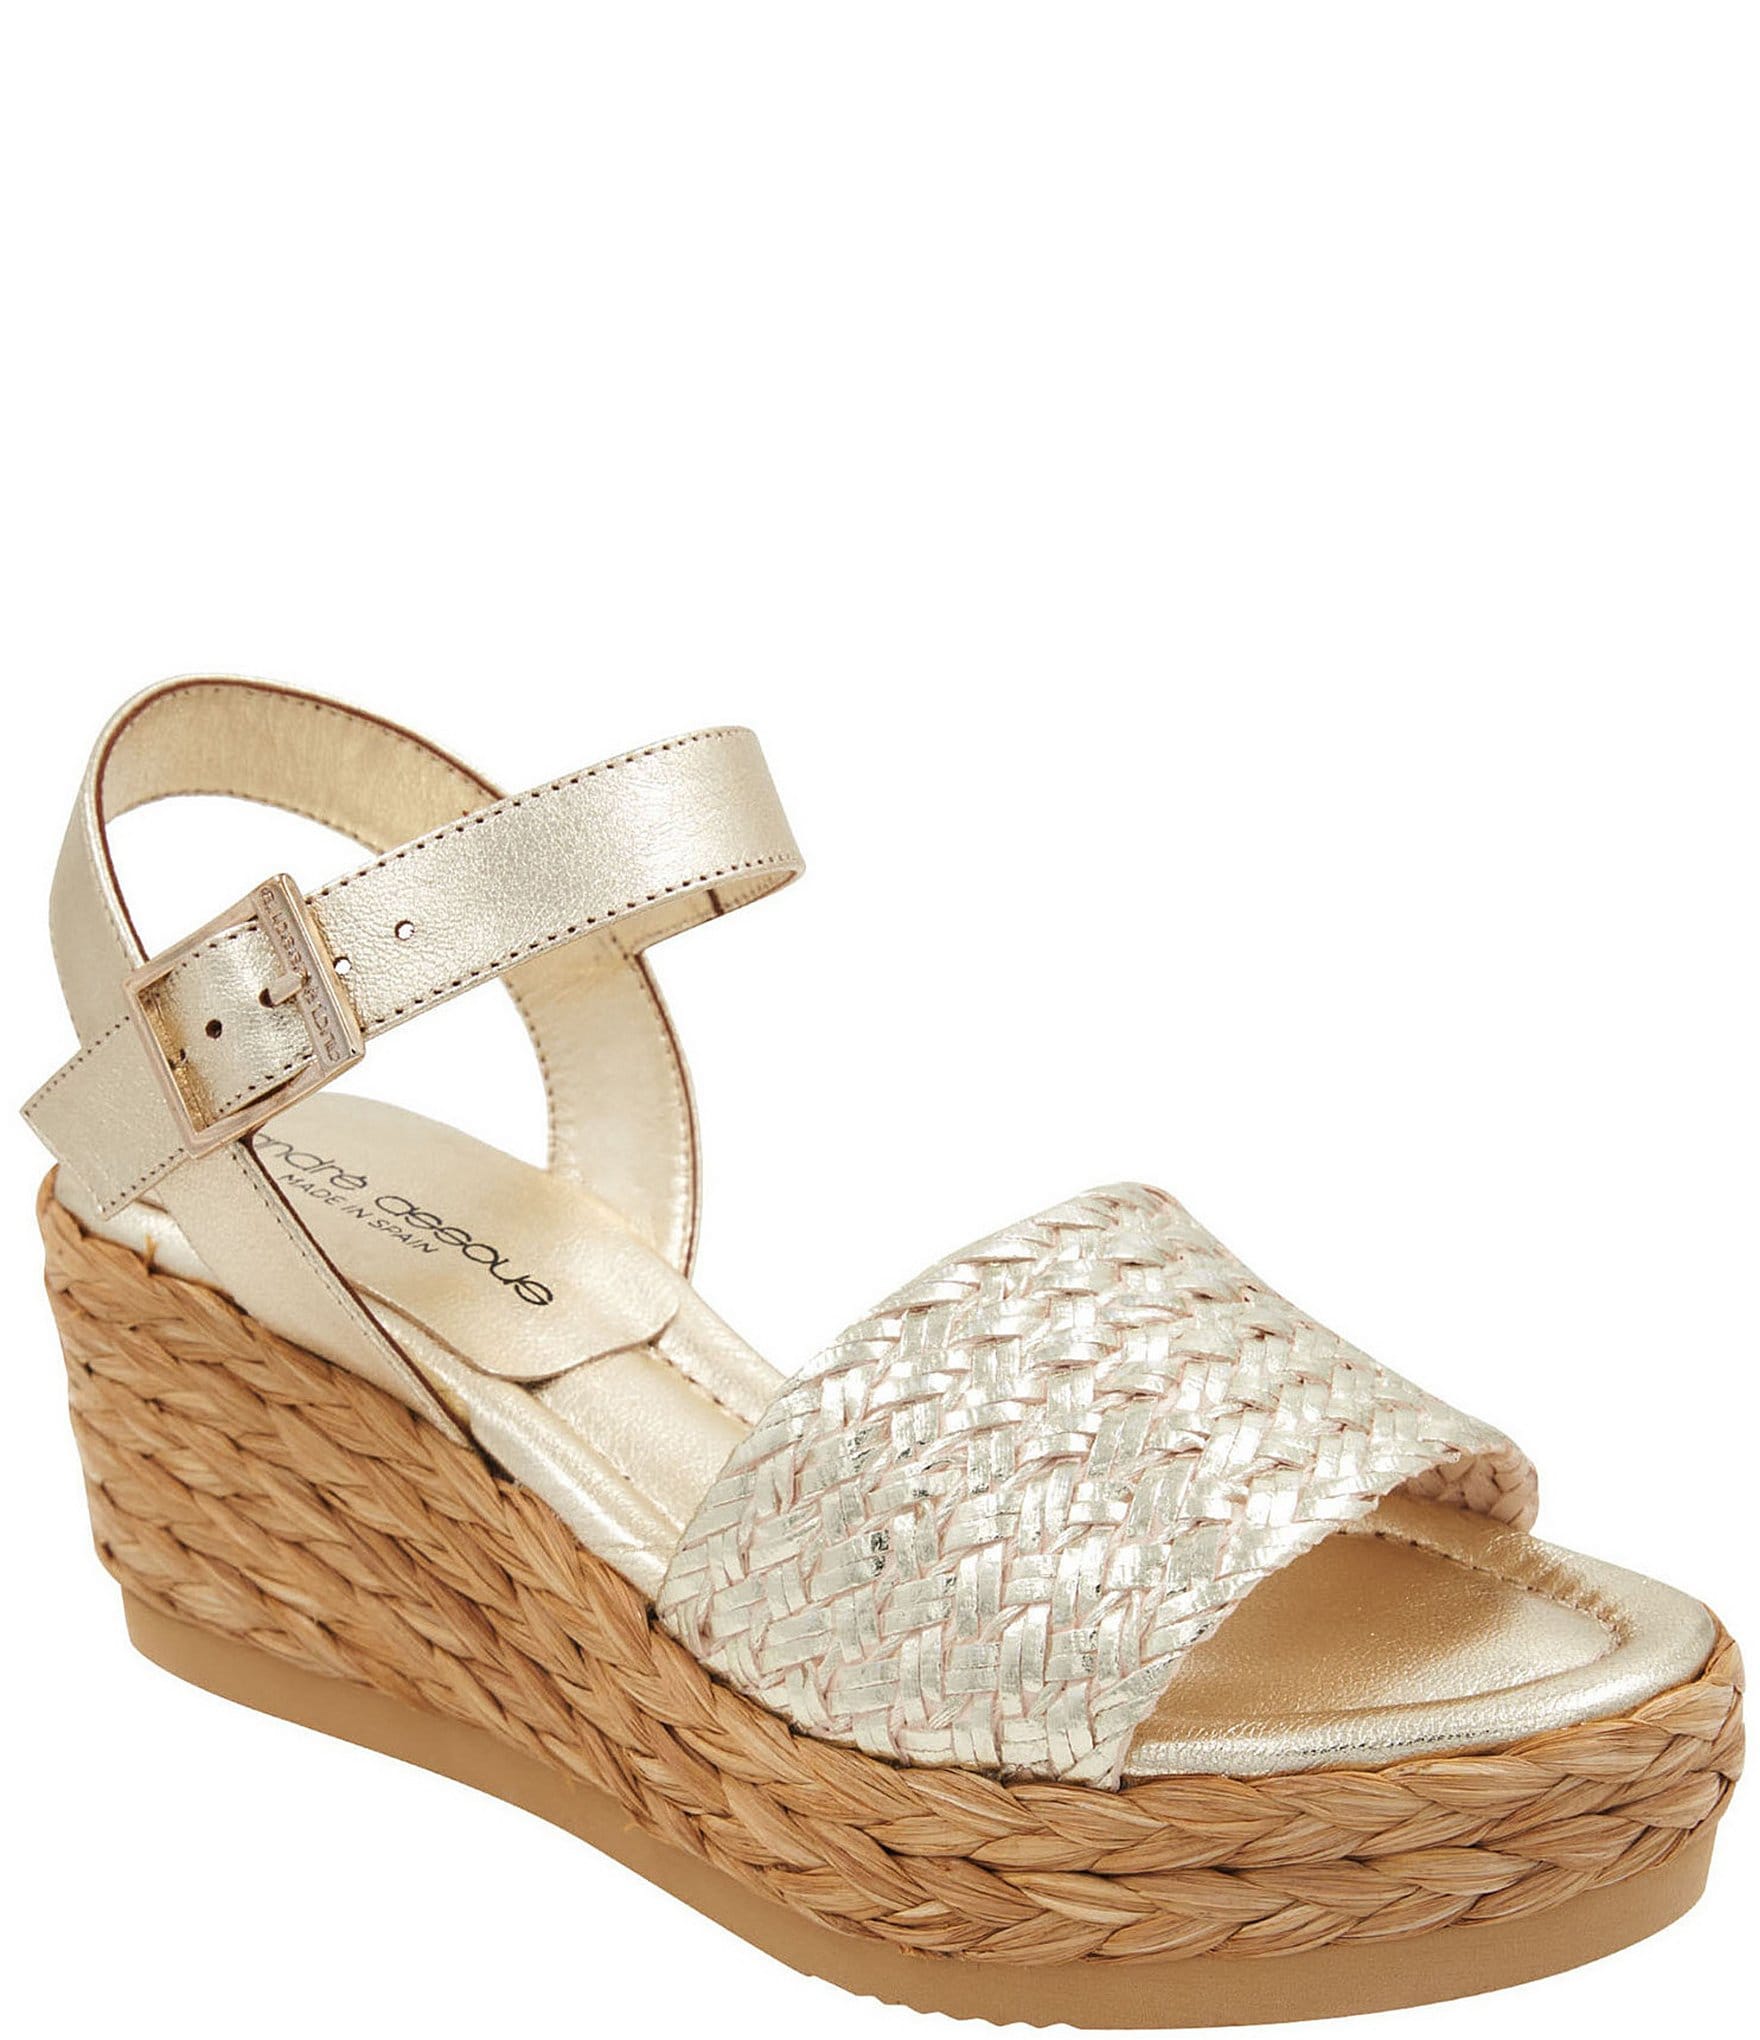 Andre Assous Carissa Leather Braided Espadrille Wedge Sandals | Dillard's